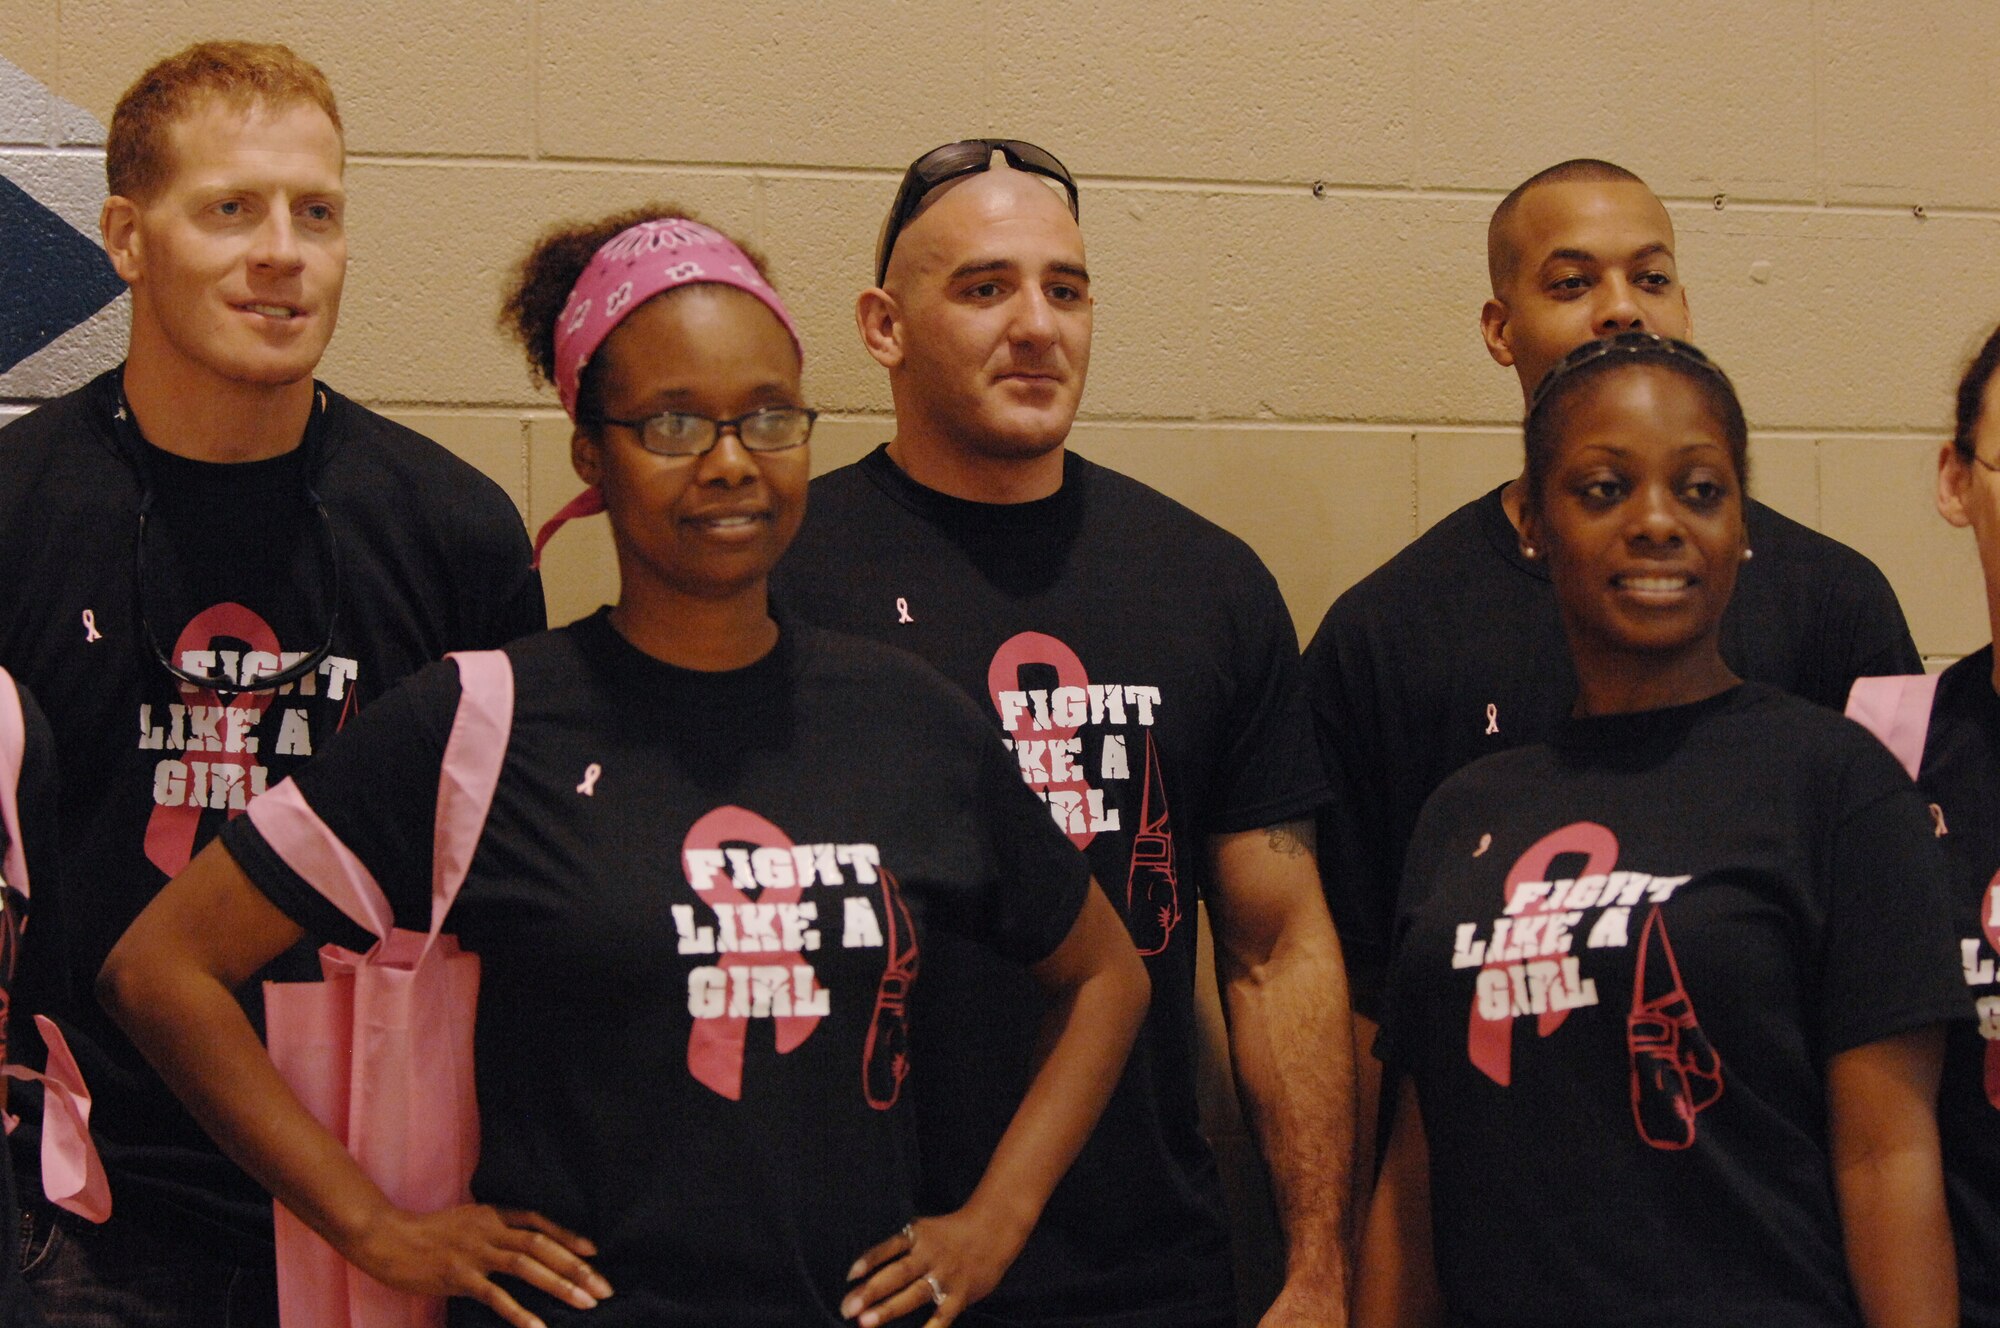 U.S. Air Force Airmen gather for the annual breast cancer awareness walk at the fitness center, Shaw Air Force Base, S.C., Oct. 2, 2012.  The event was held by the Health and Wellness Center along with the 20th Medical Group.  More than 100 people participated in the walk. (U.S. Air Force photo by Airman Nicole Sikorski/Released)